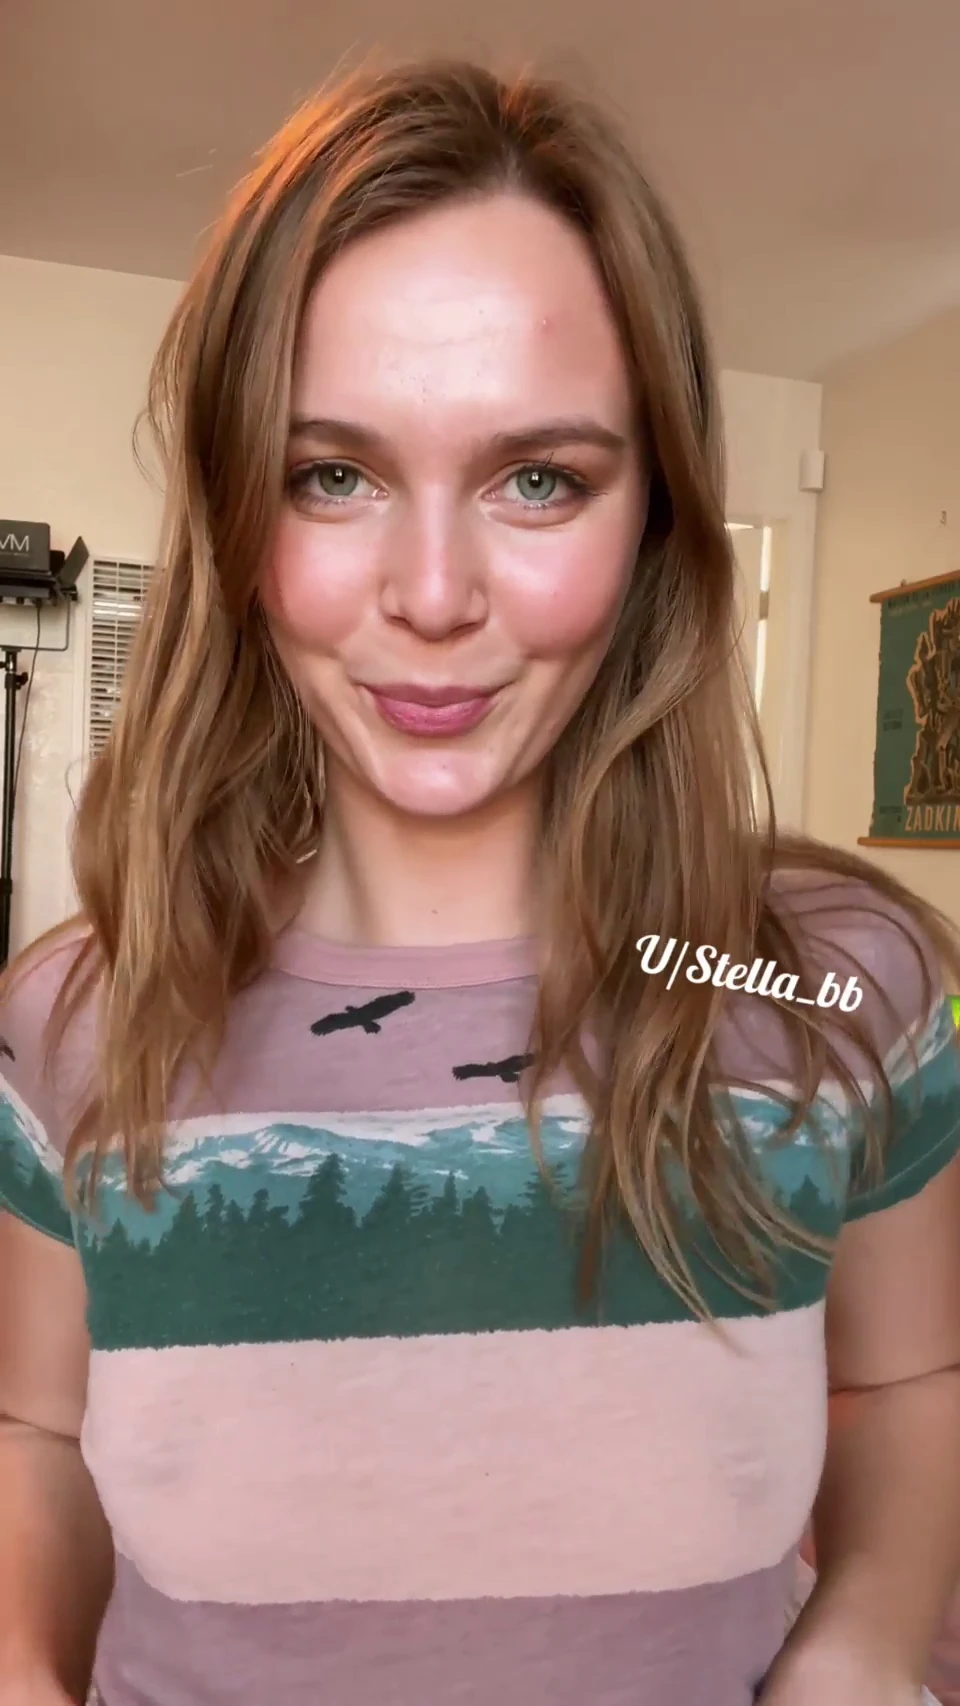 Showing off my perky nips always makes me smile [GIF]